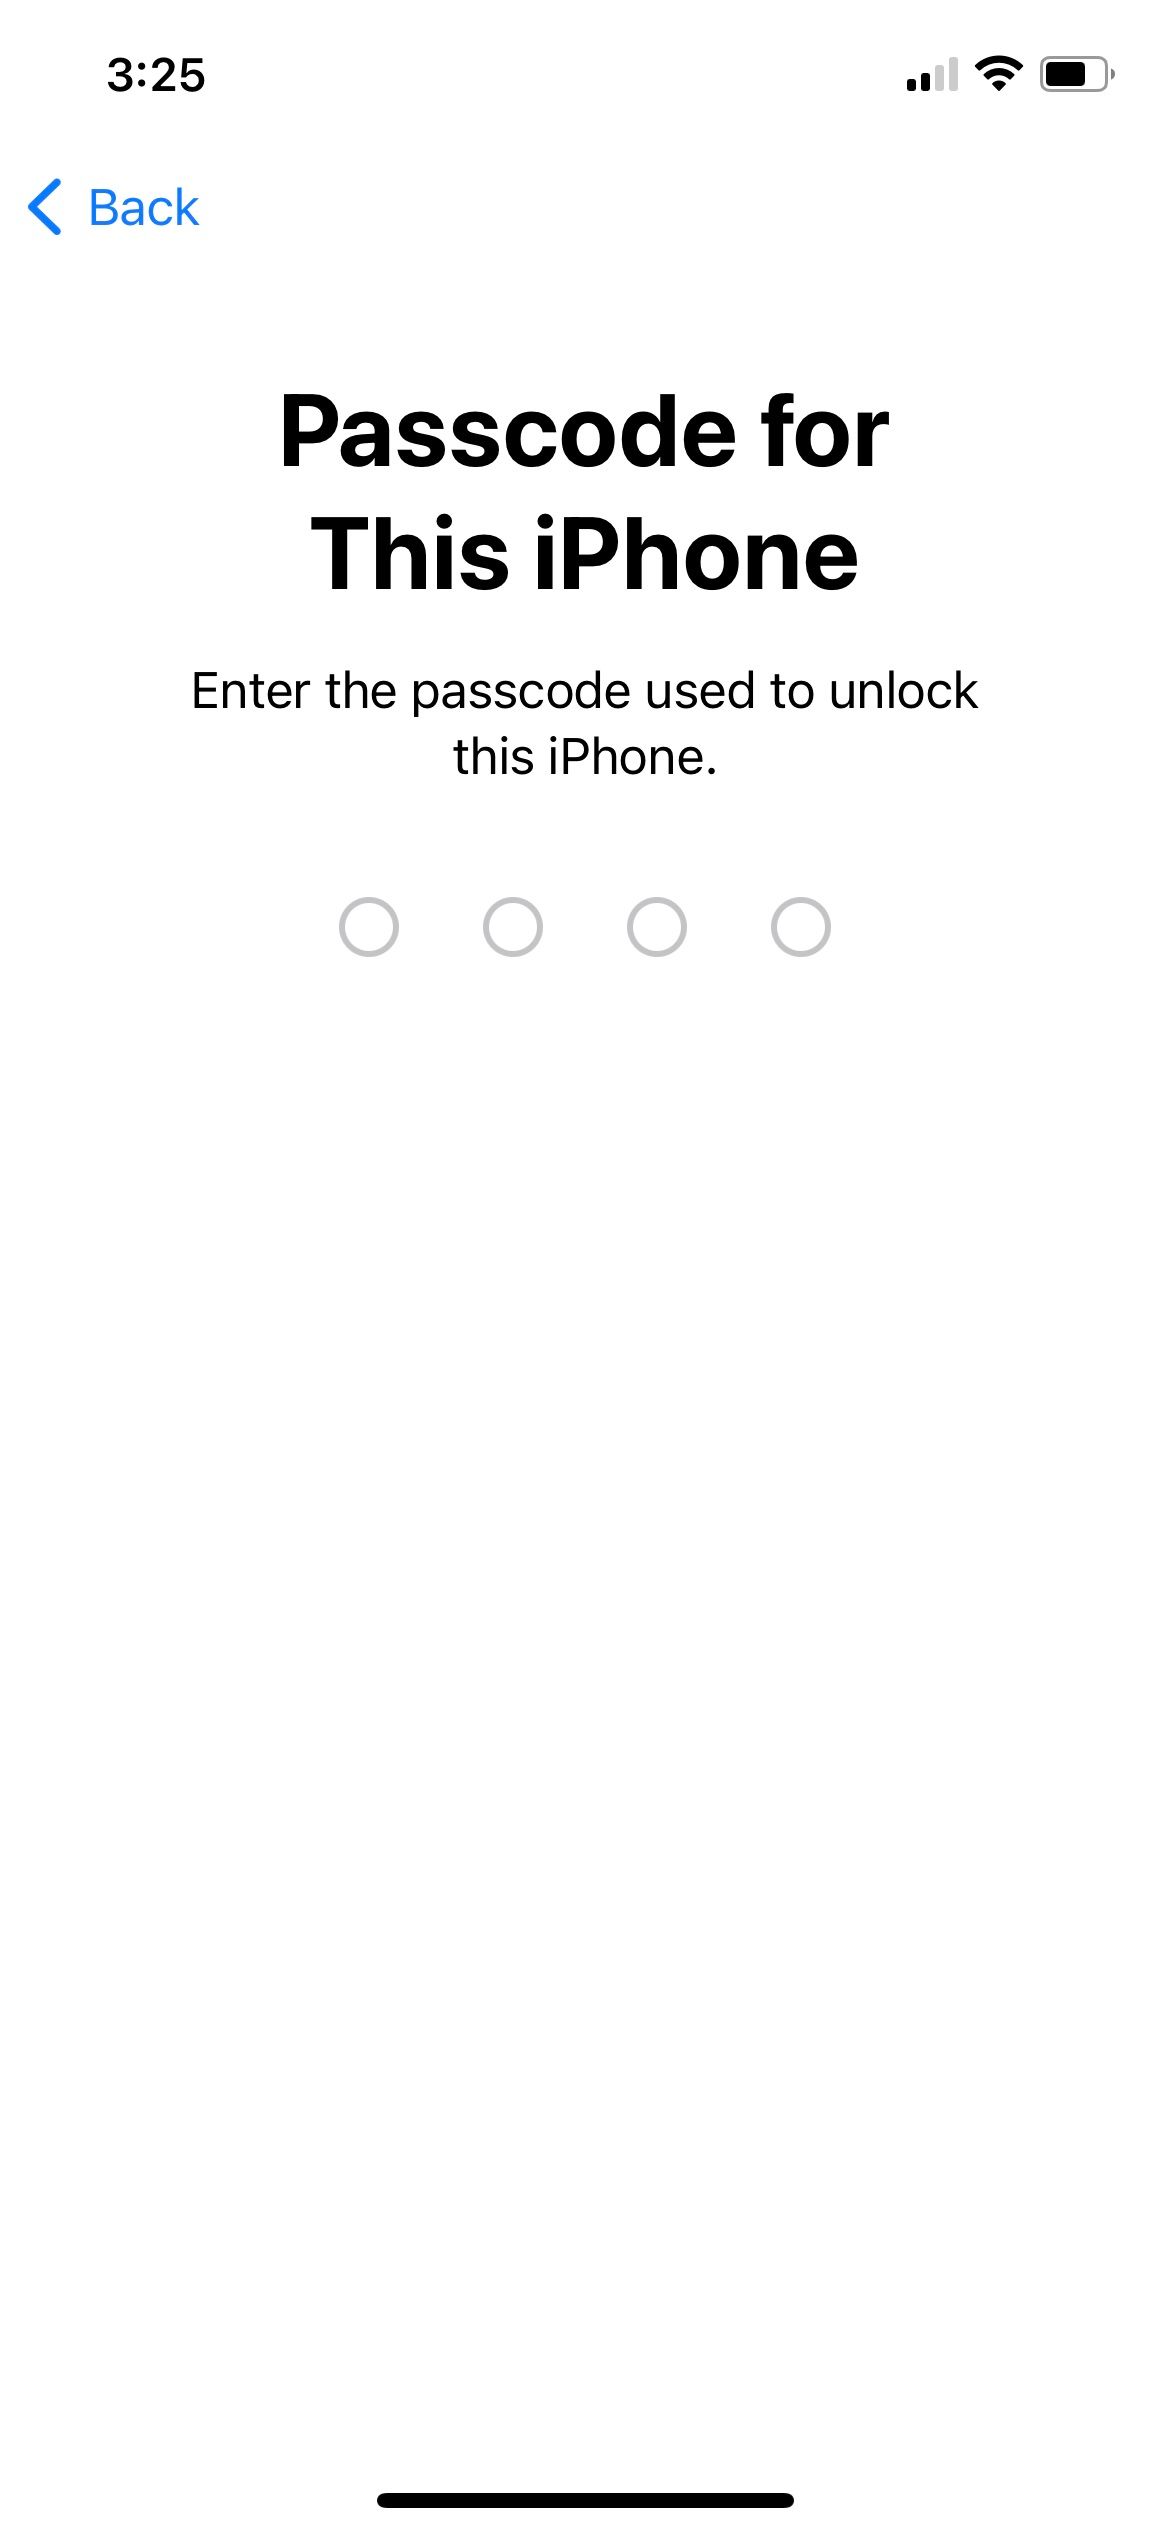 Asking for Passcode to erase data on iPhone